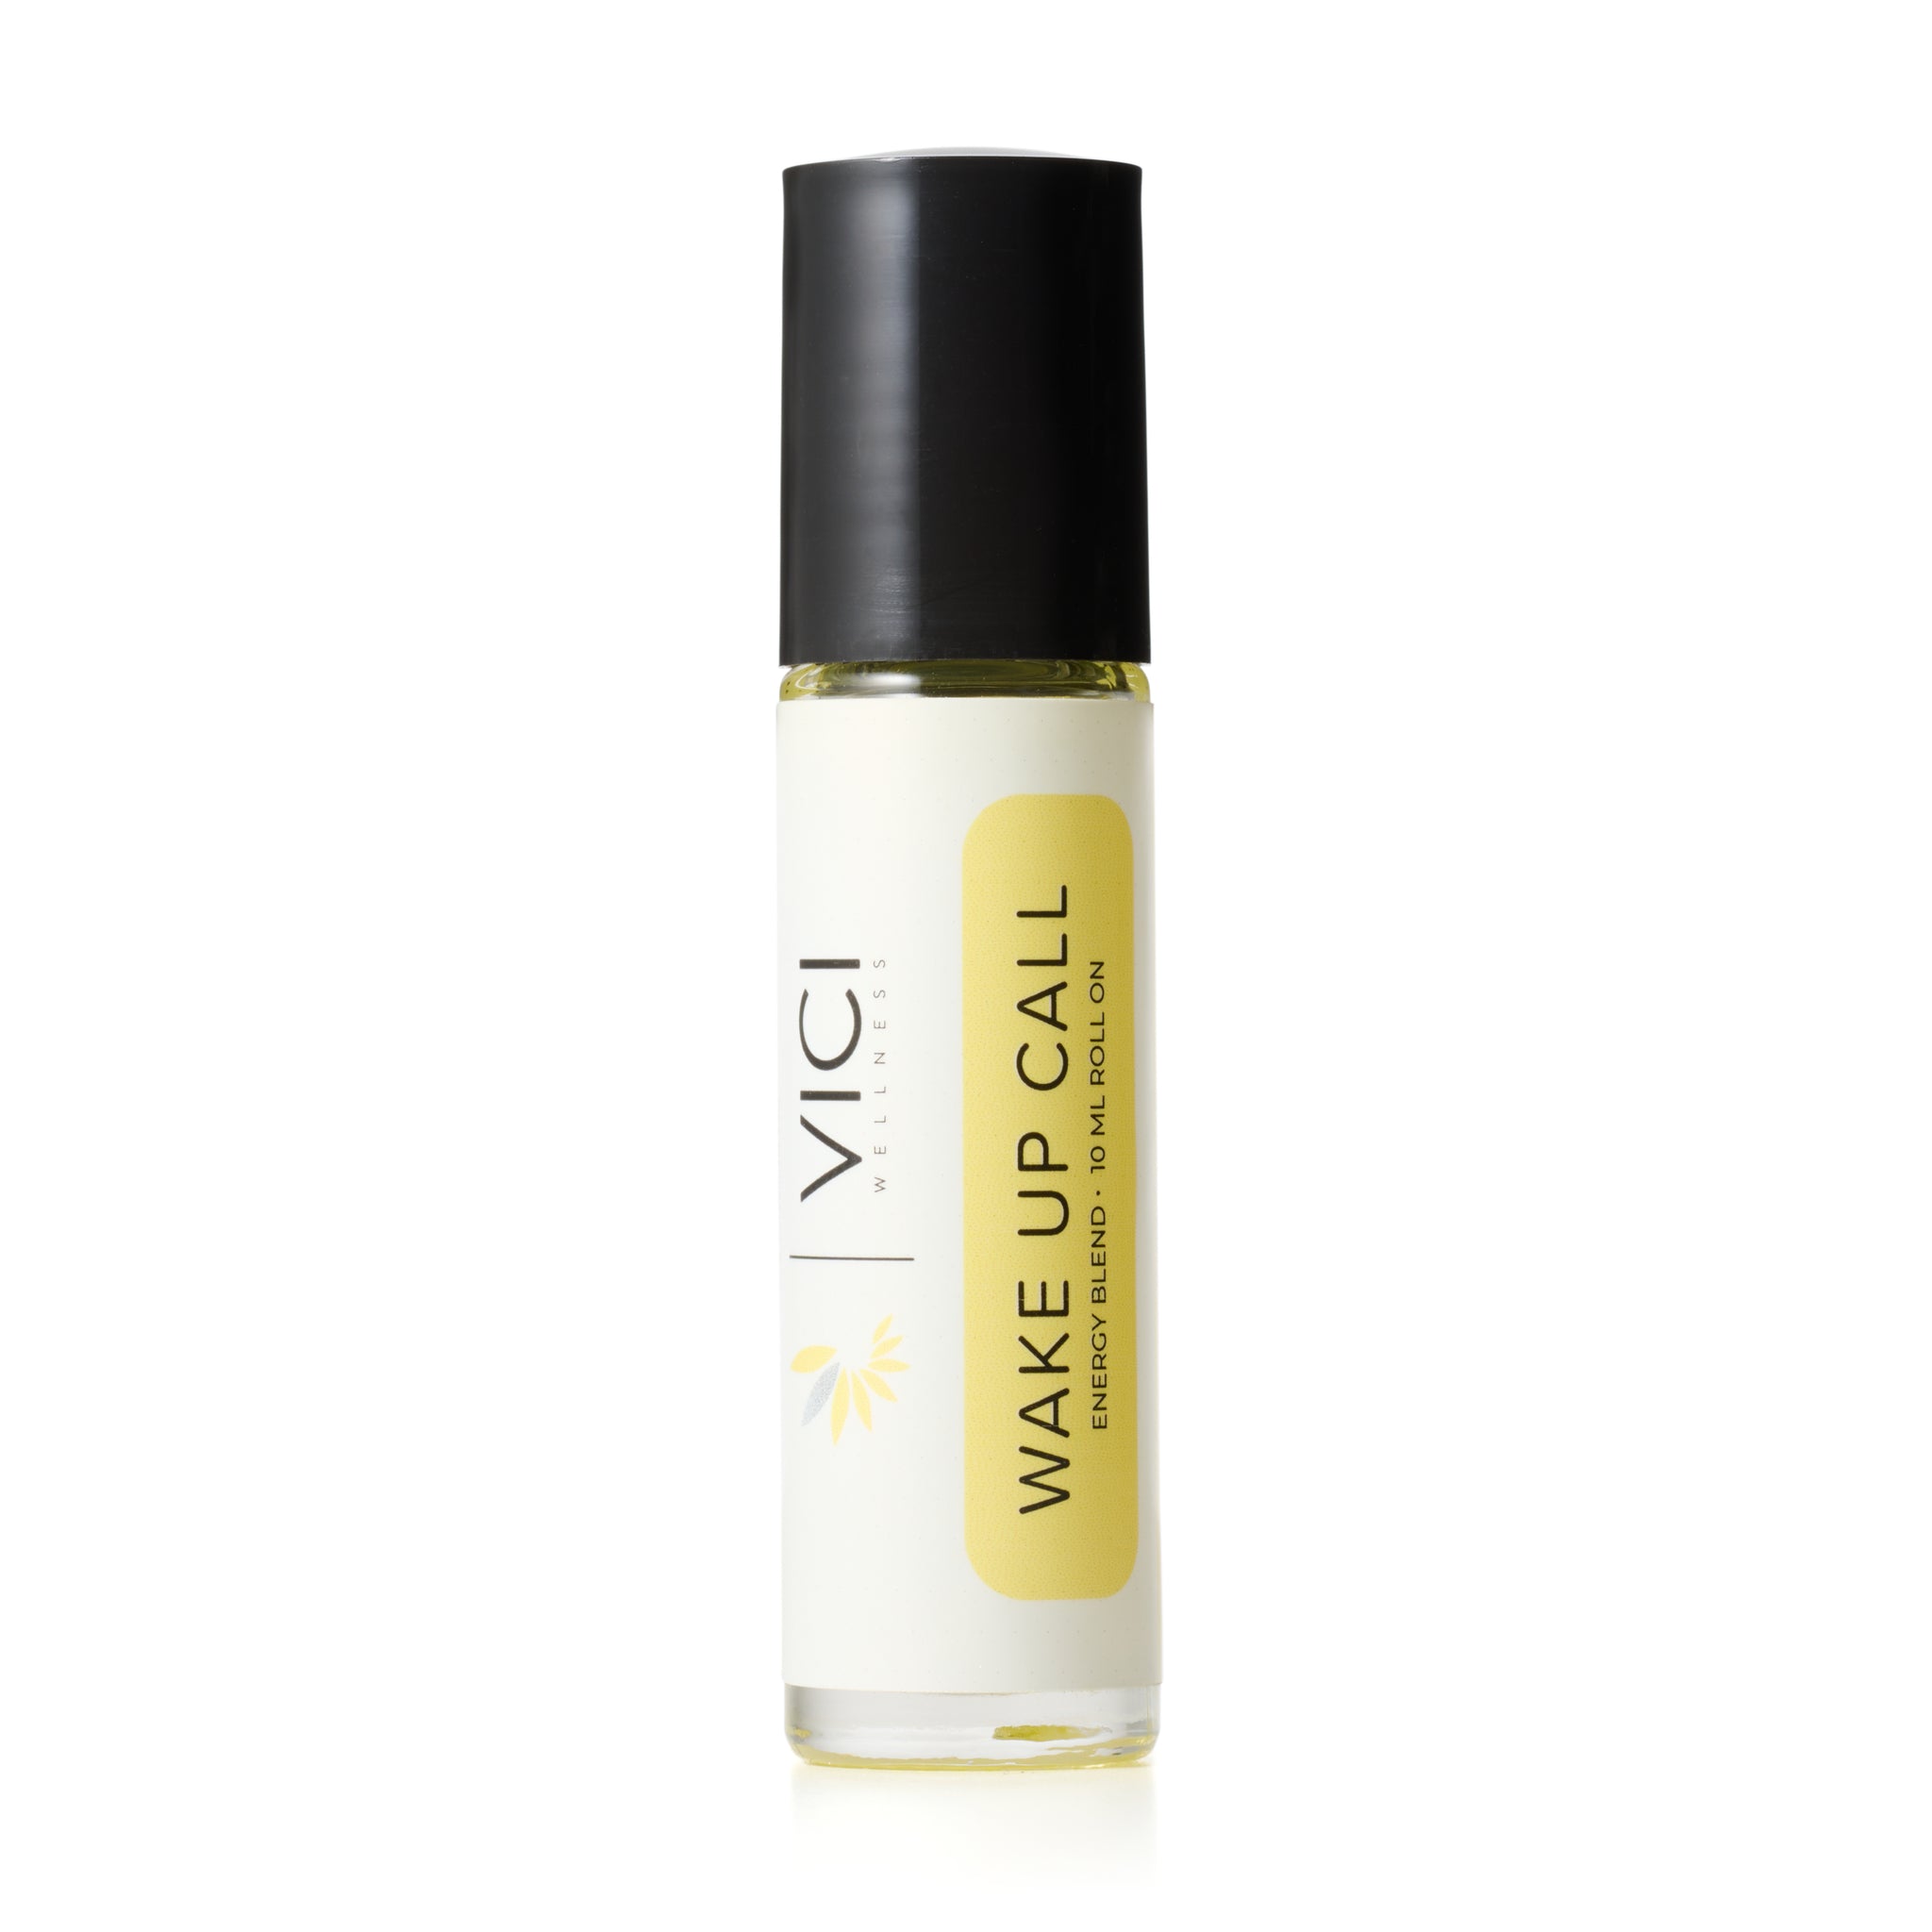 Wake Up Call Aromatherapy Roller